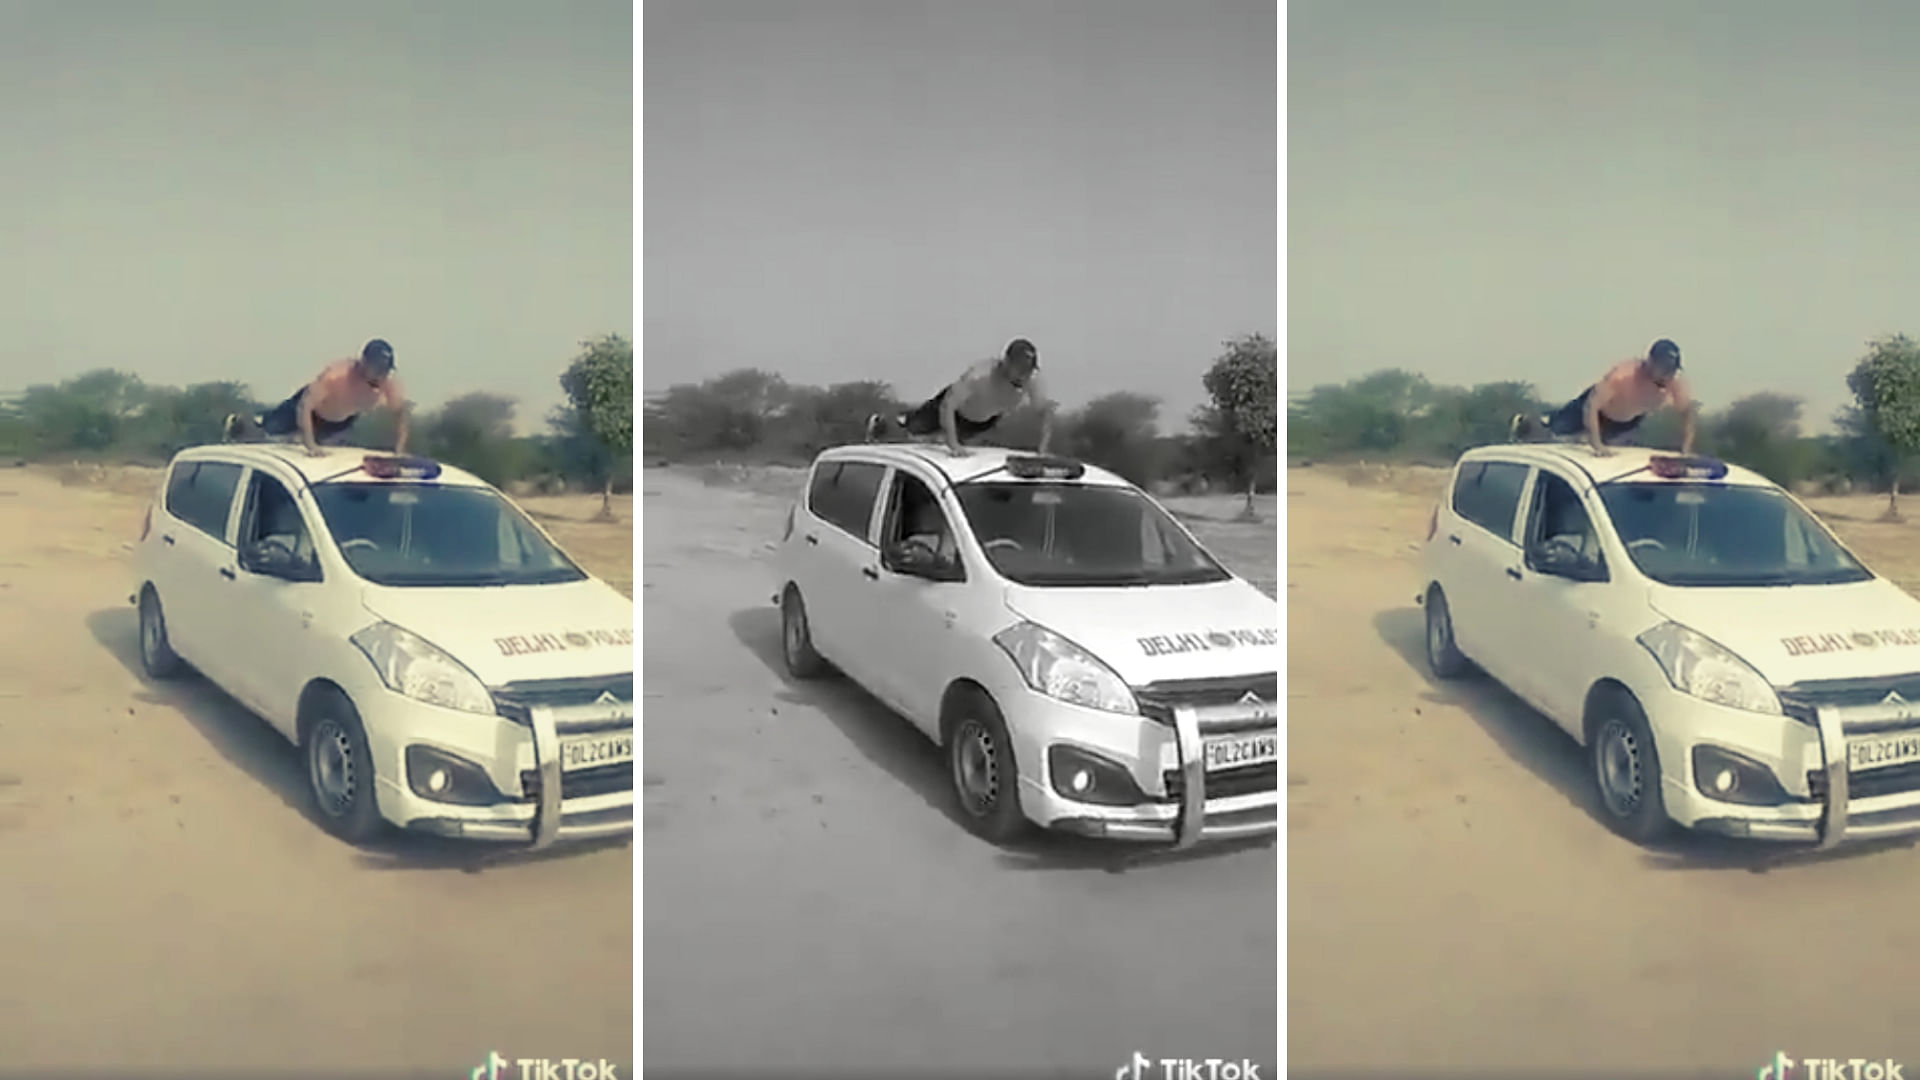 A still from the video of a man doing stunts on what appears to be a Delhi Police vehicle. The police has said that the vehicle is not owned by them.